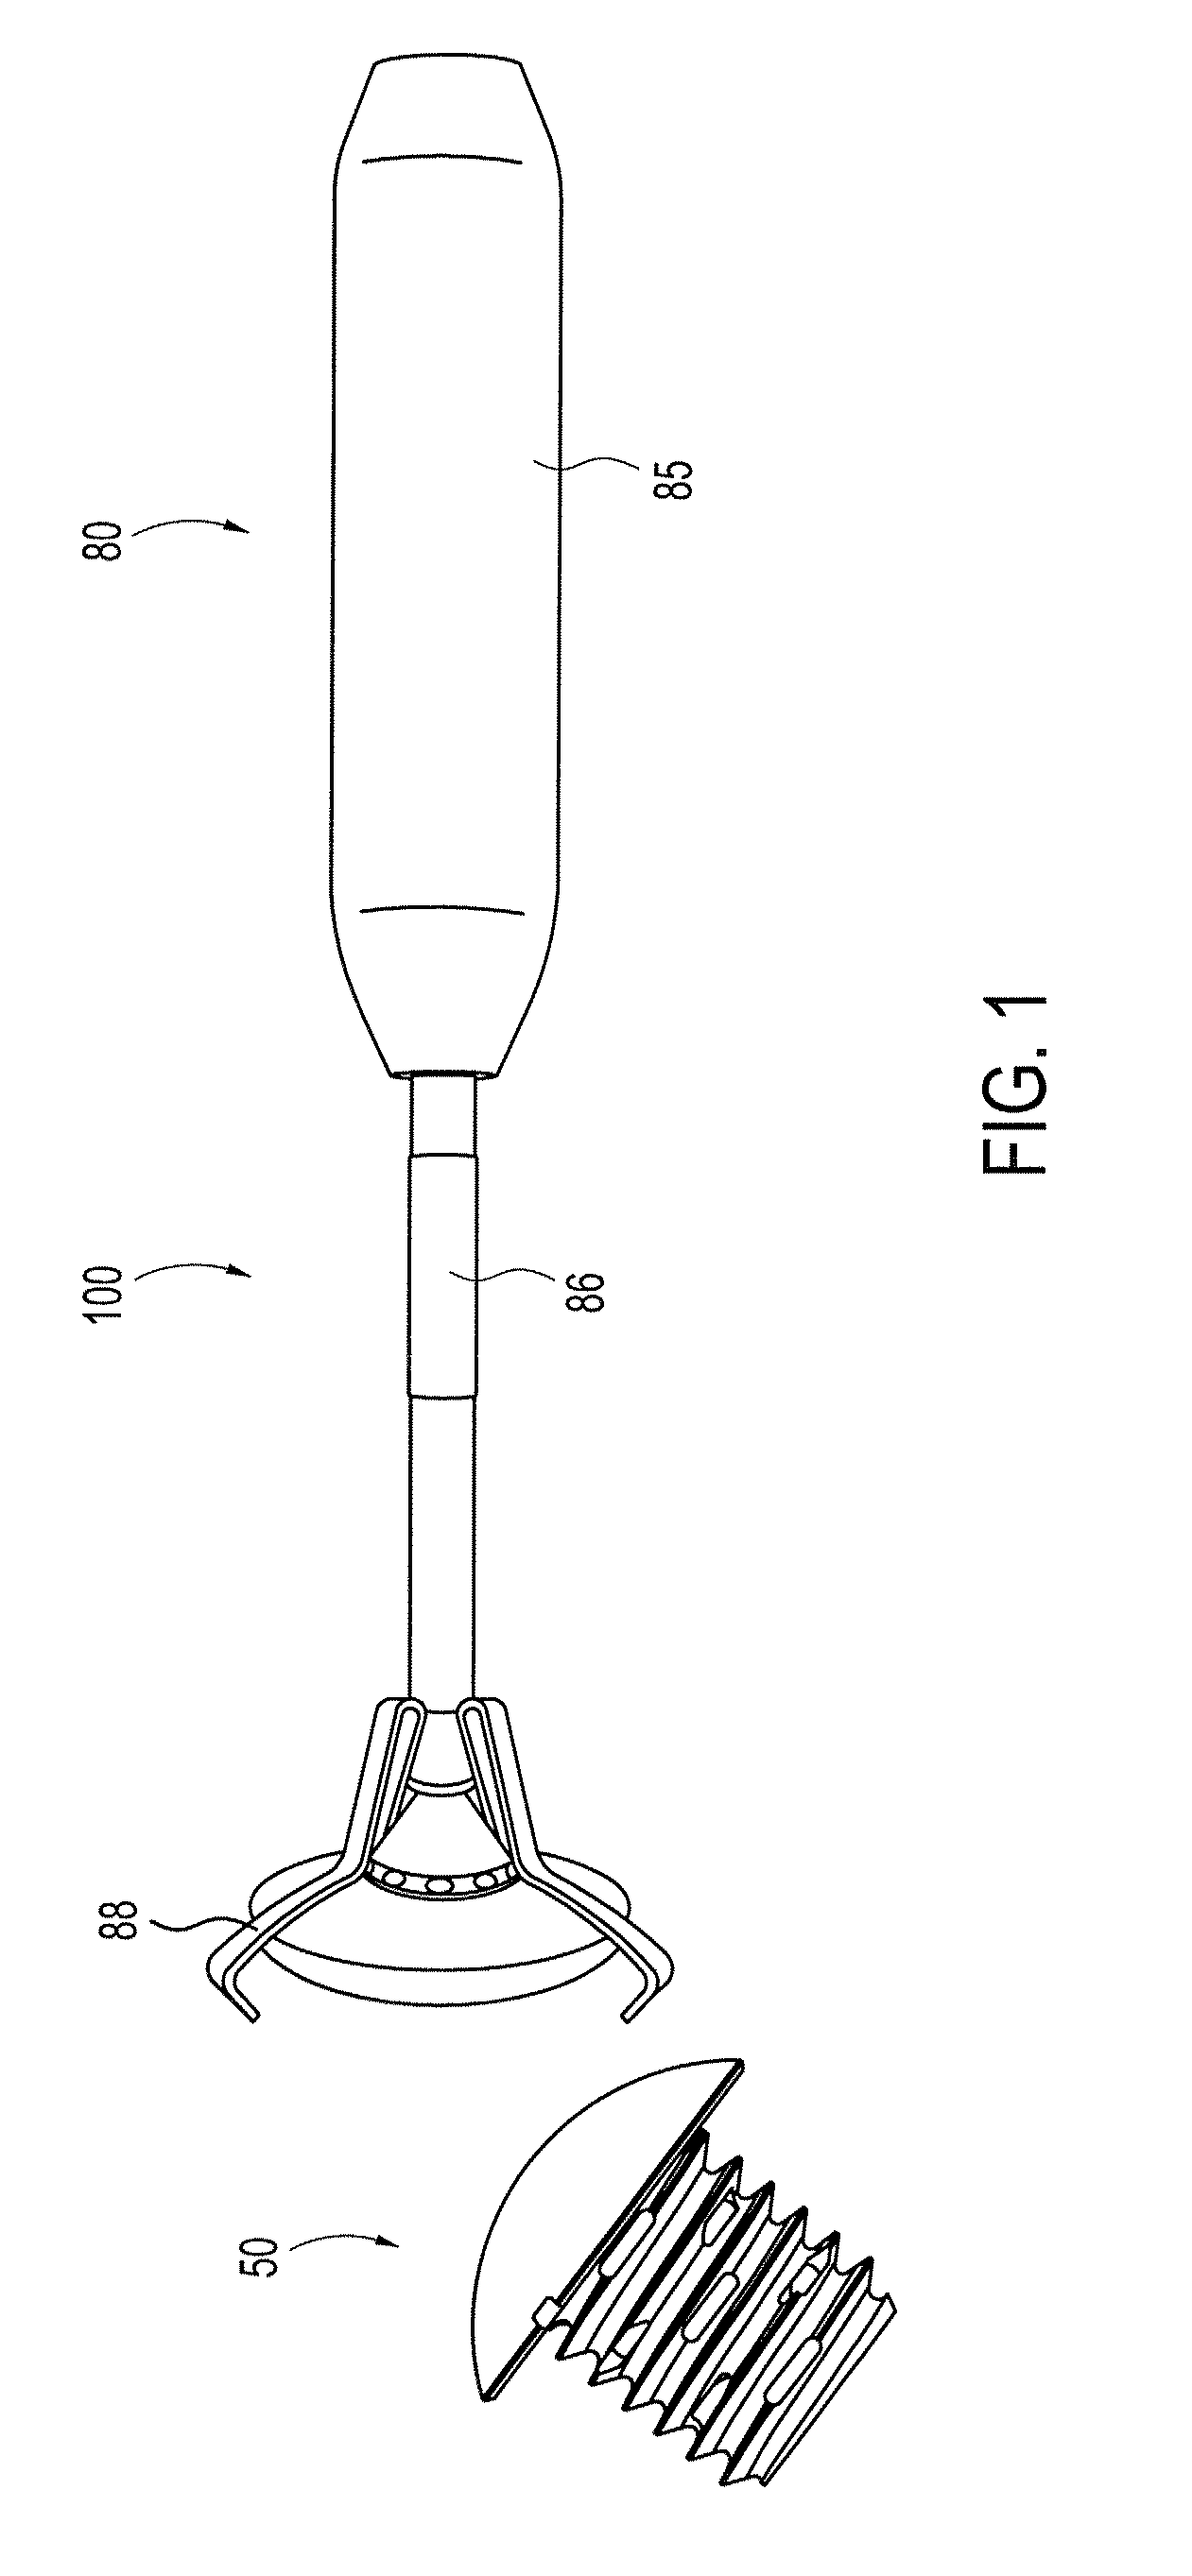 Dome shaped implant and inserter